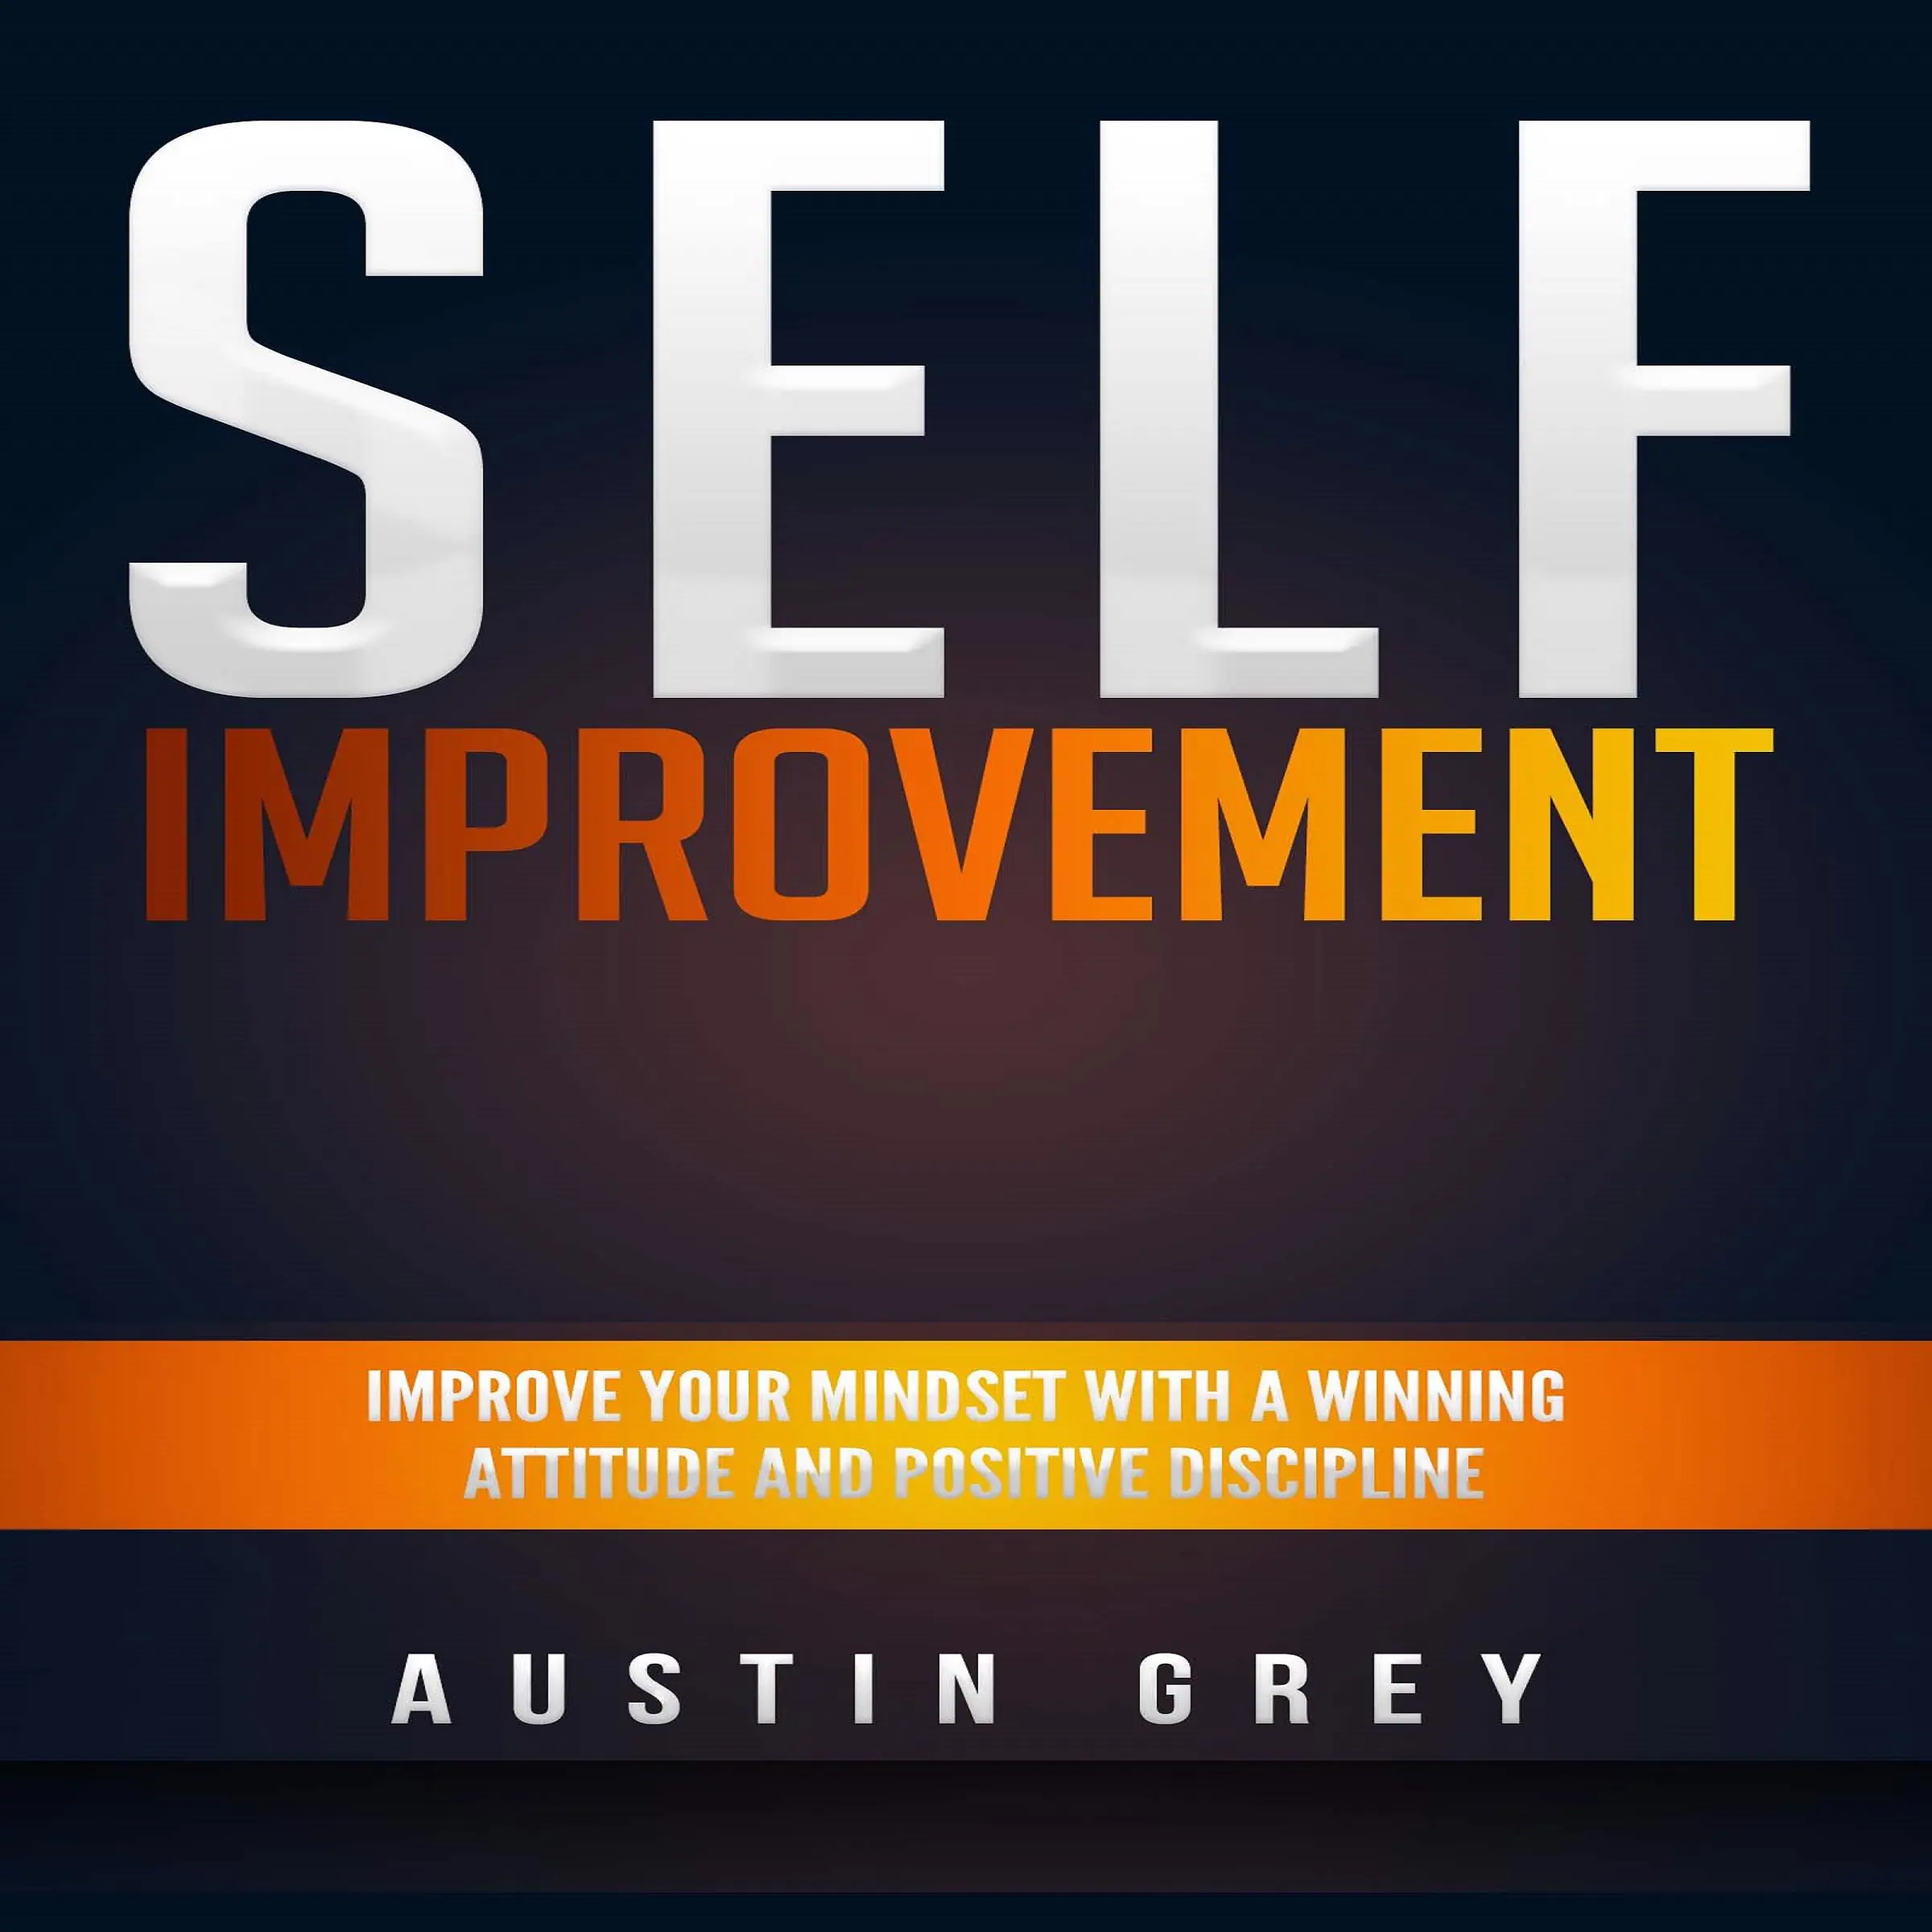 Self-Improvement: Improve Your Mindset With a Winning Attitude and Positive Discipline Audiobook by Austin Grey